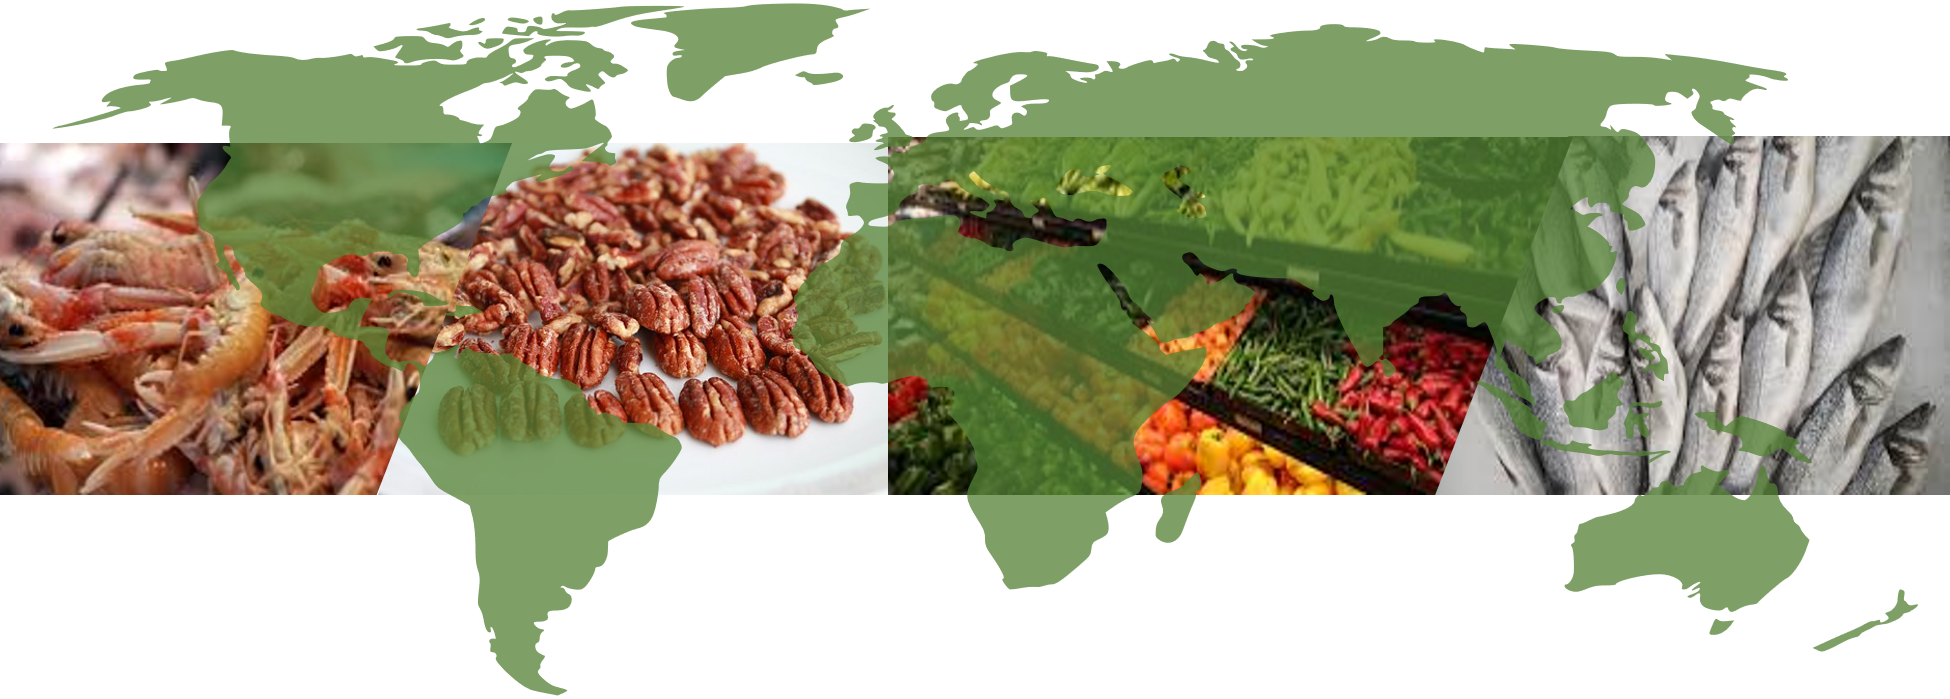 Country of Origin banner with seafood, nuts, and produce